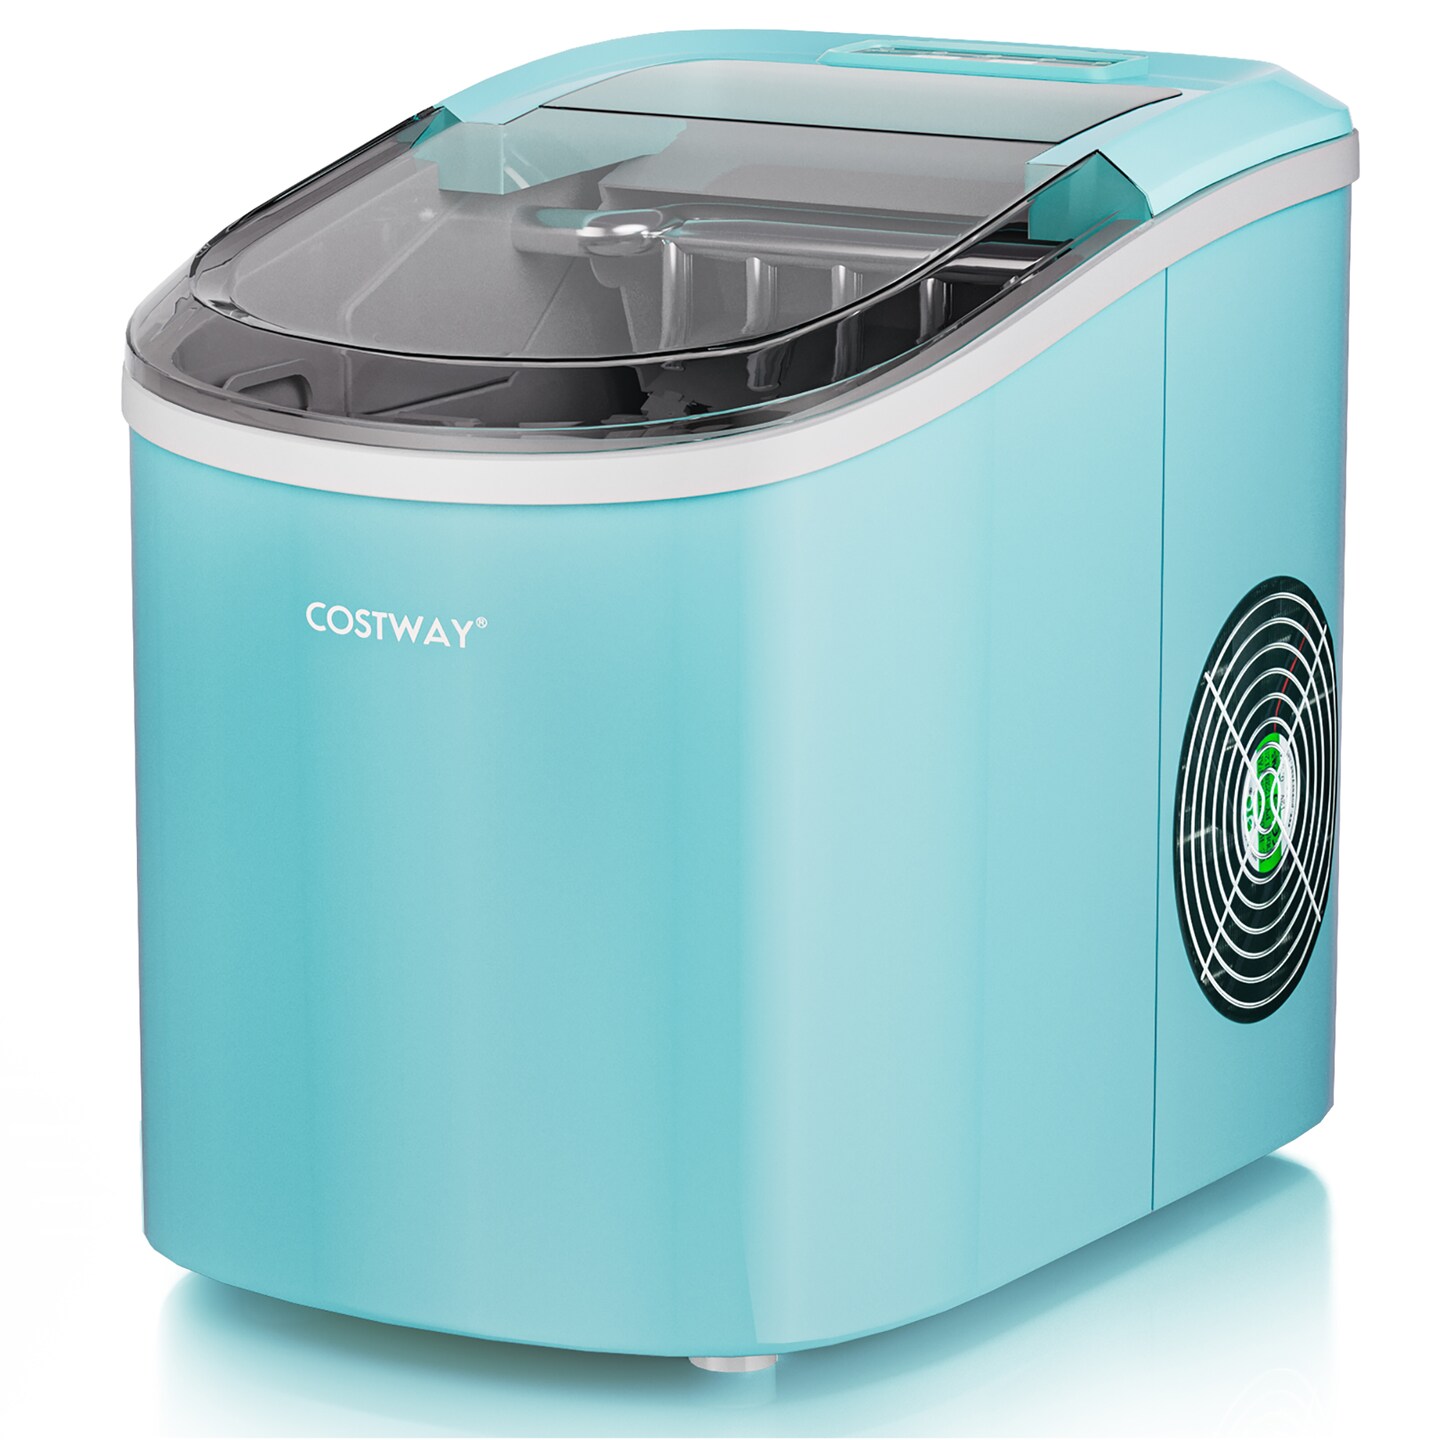 Ice Maker Machine With Scoop and Basket Compact Automatic 9 Cubes